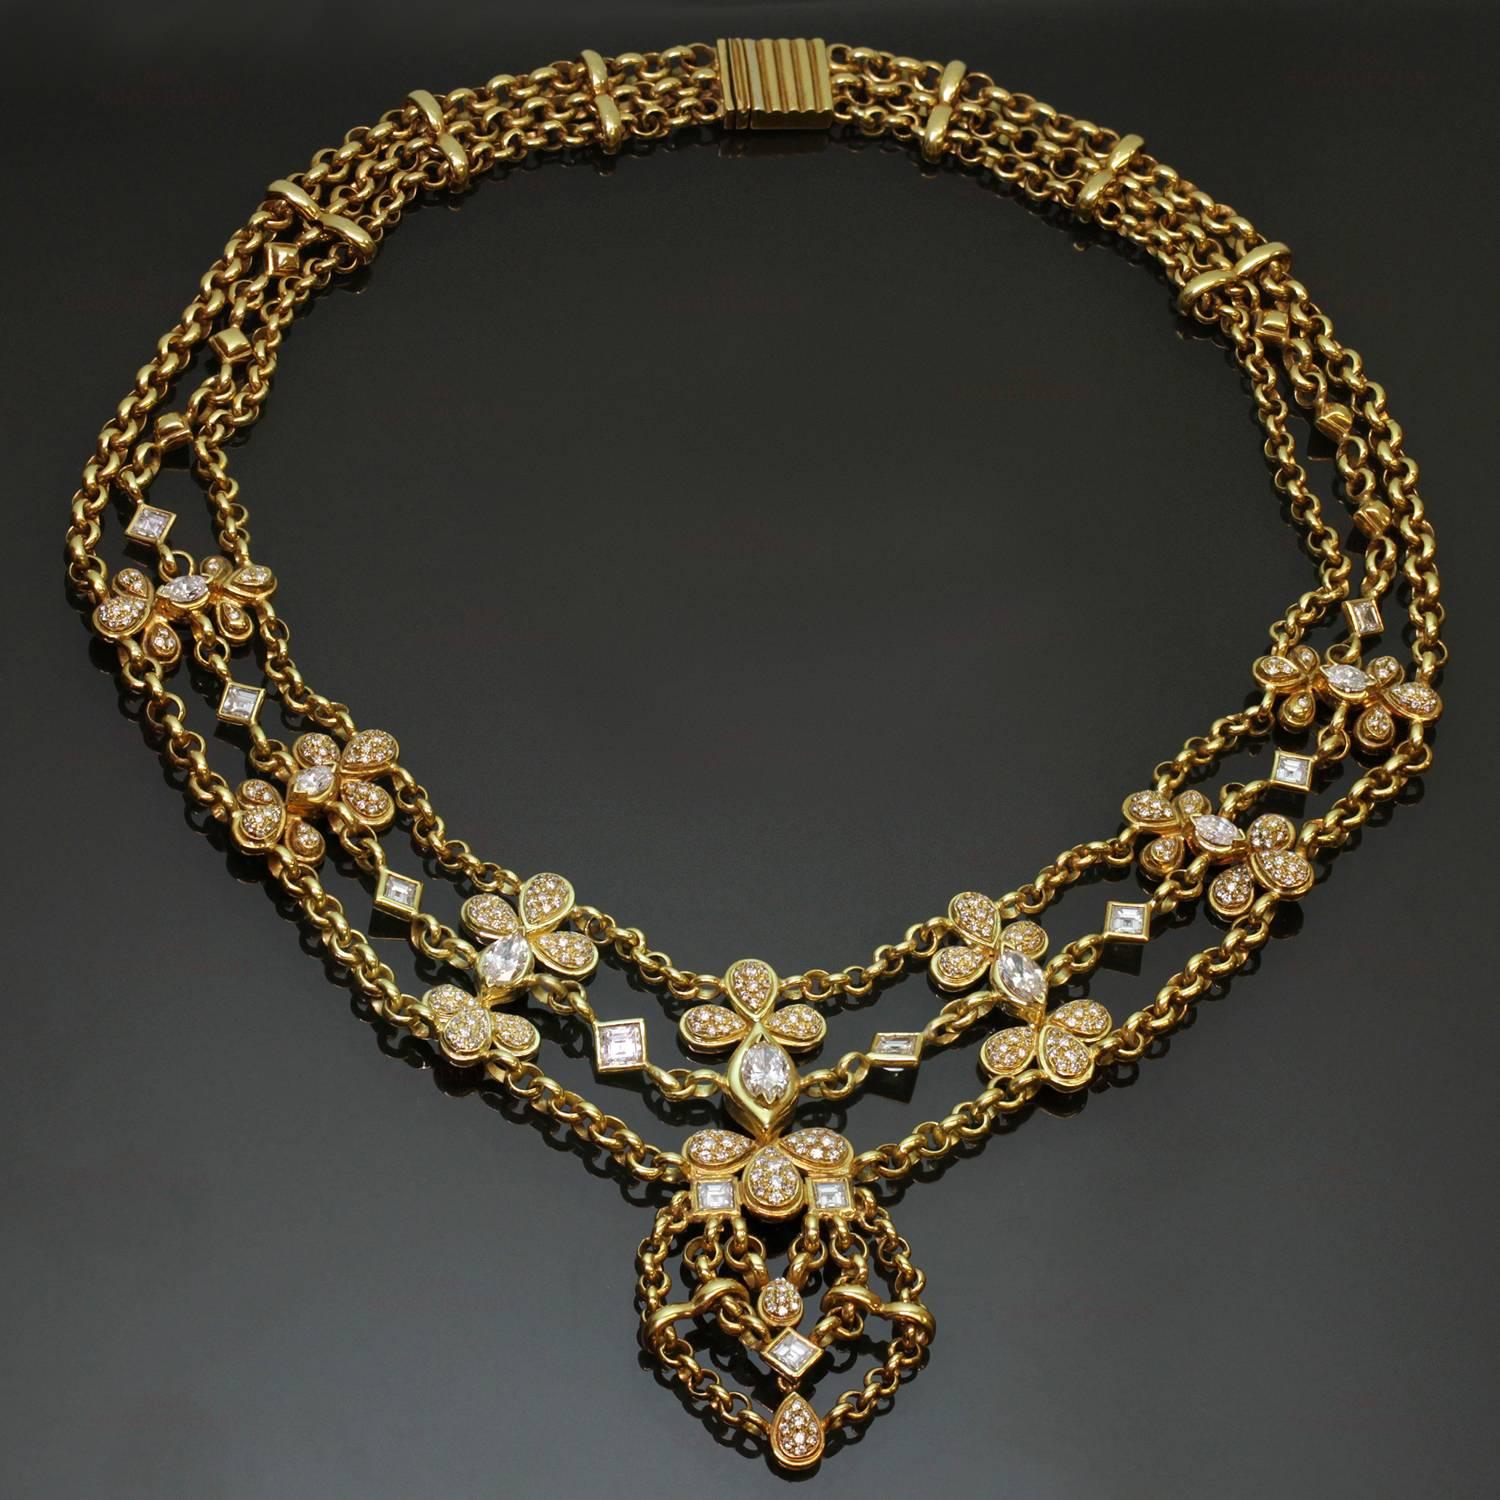 This exquisite Chatila necklace is crafted in 18k yellow gold and is composed of three rolo chains, pear-shaped elements pave-set with  E-F VVS1-VVS2 diamonds and accented with square and marquise-cut diamonds bezel-set in 18k yellow gold. The